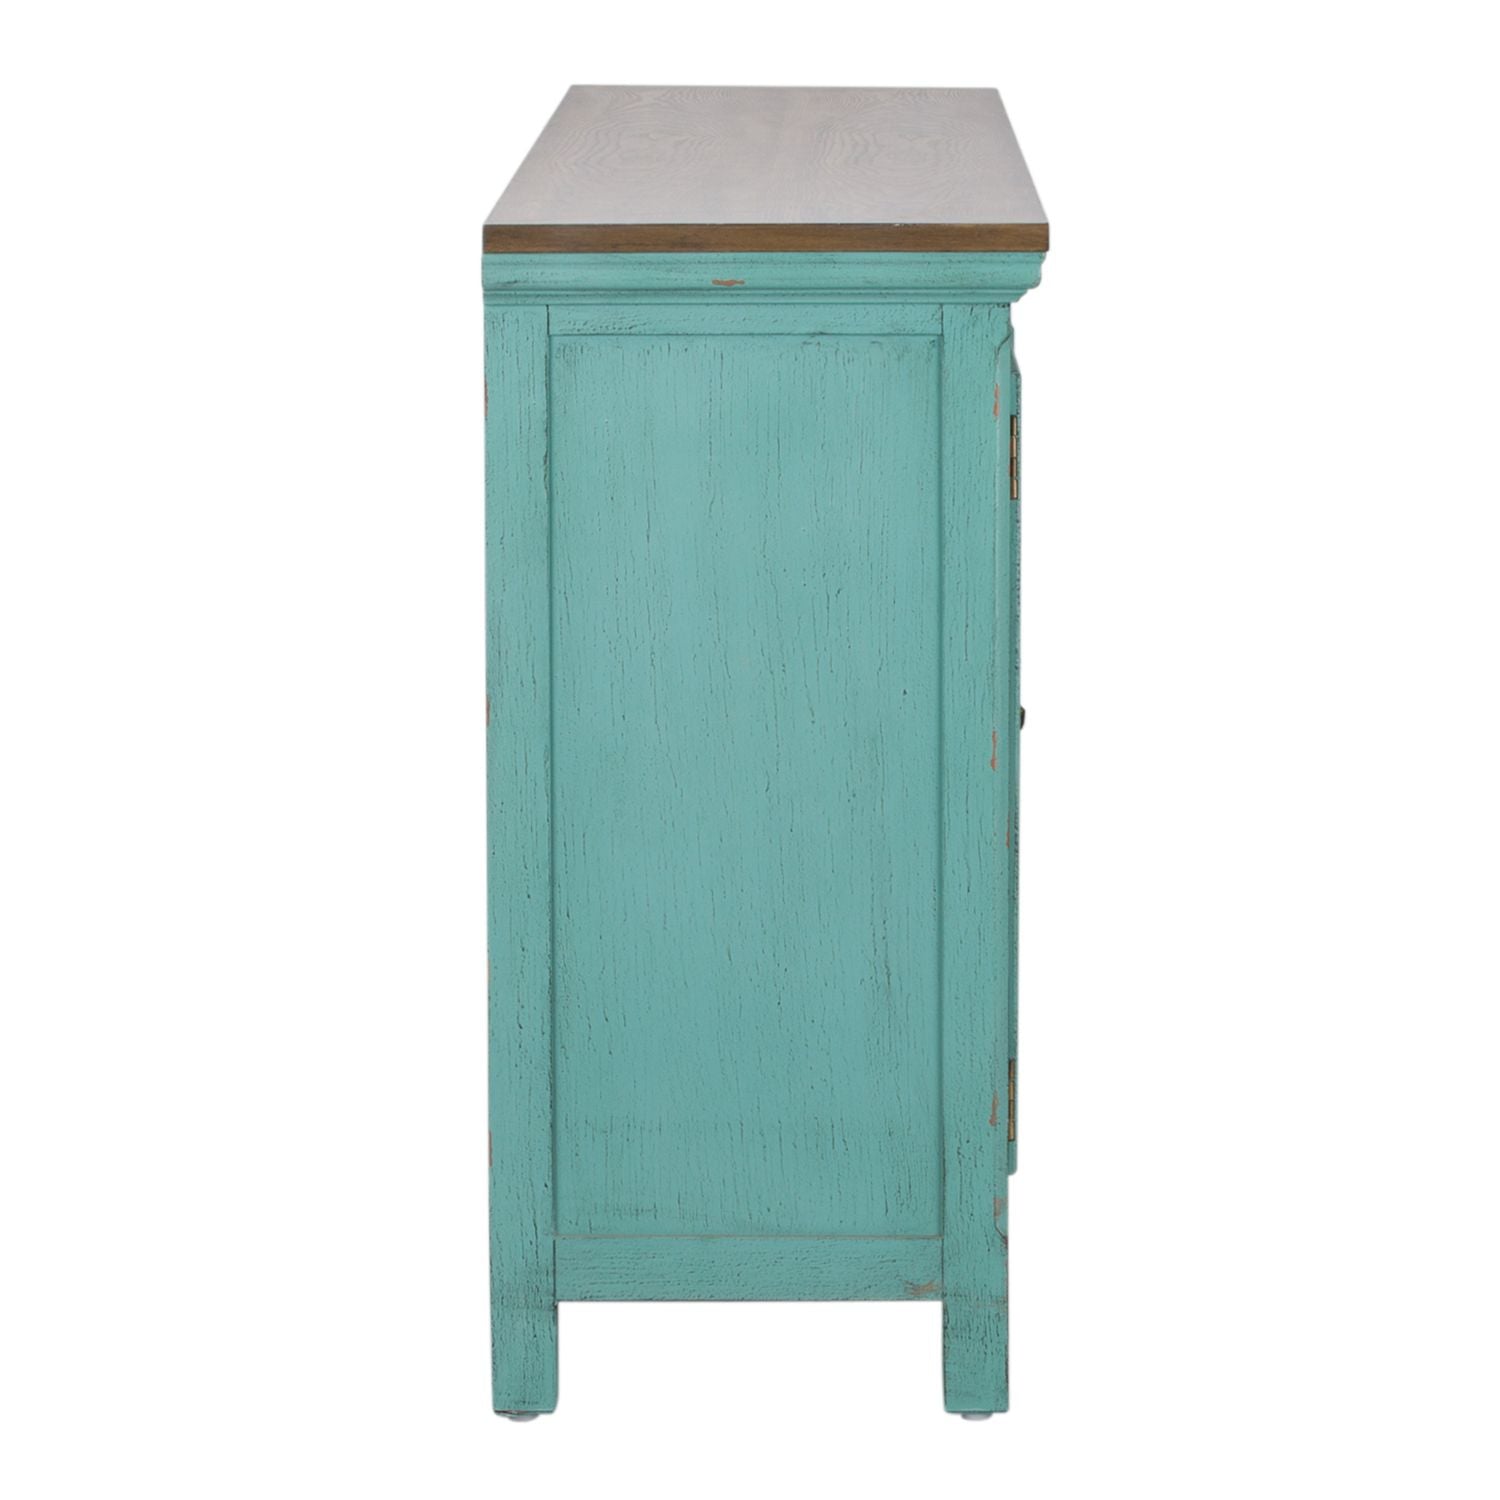 Dinell 4 Door Accent Cabinet